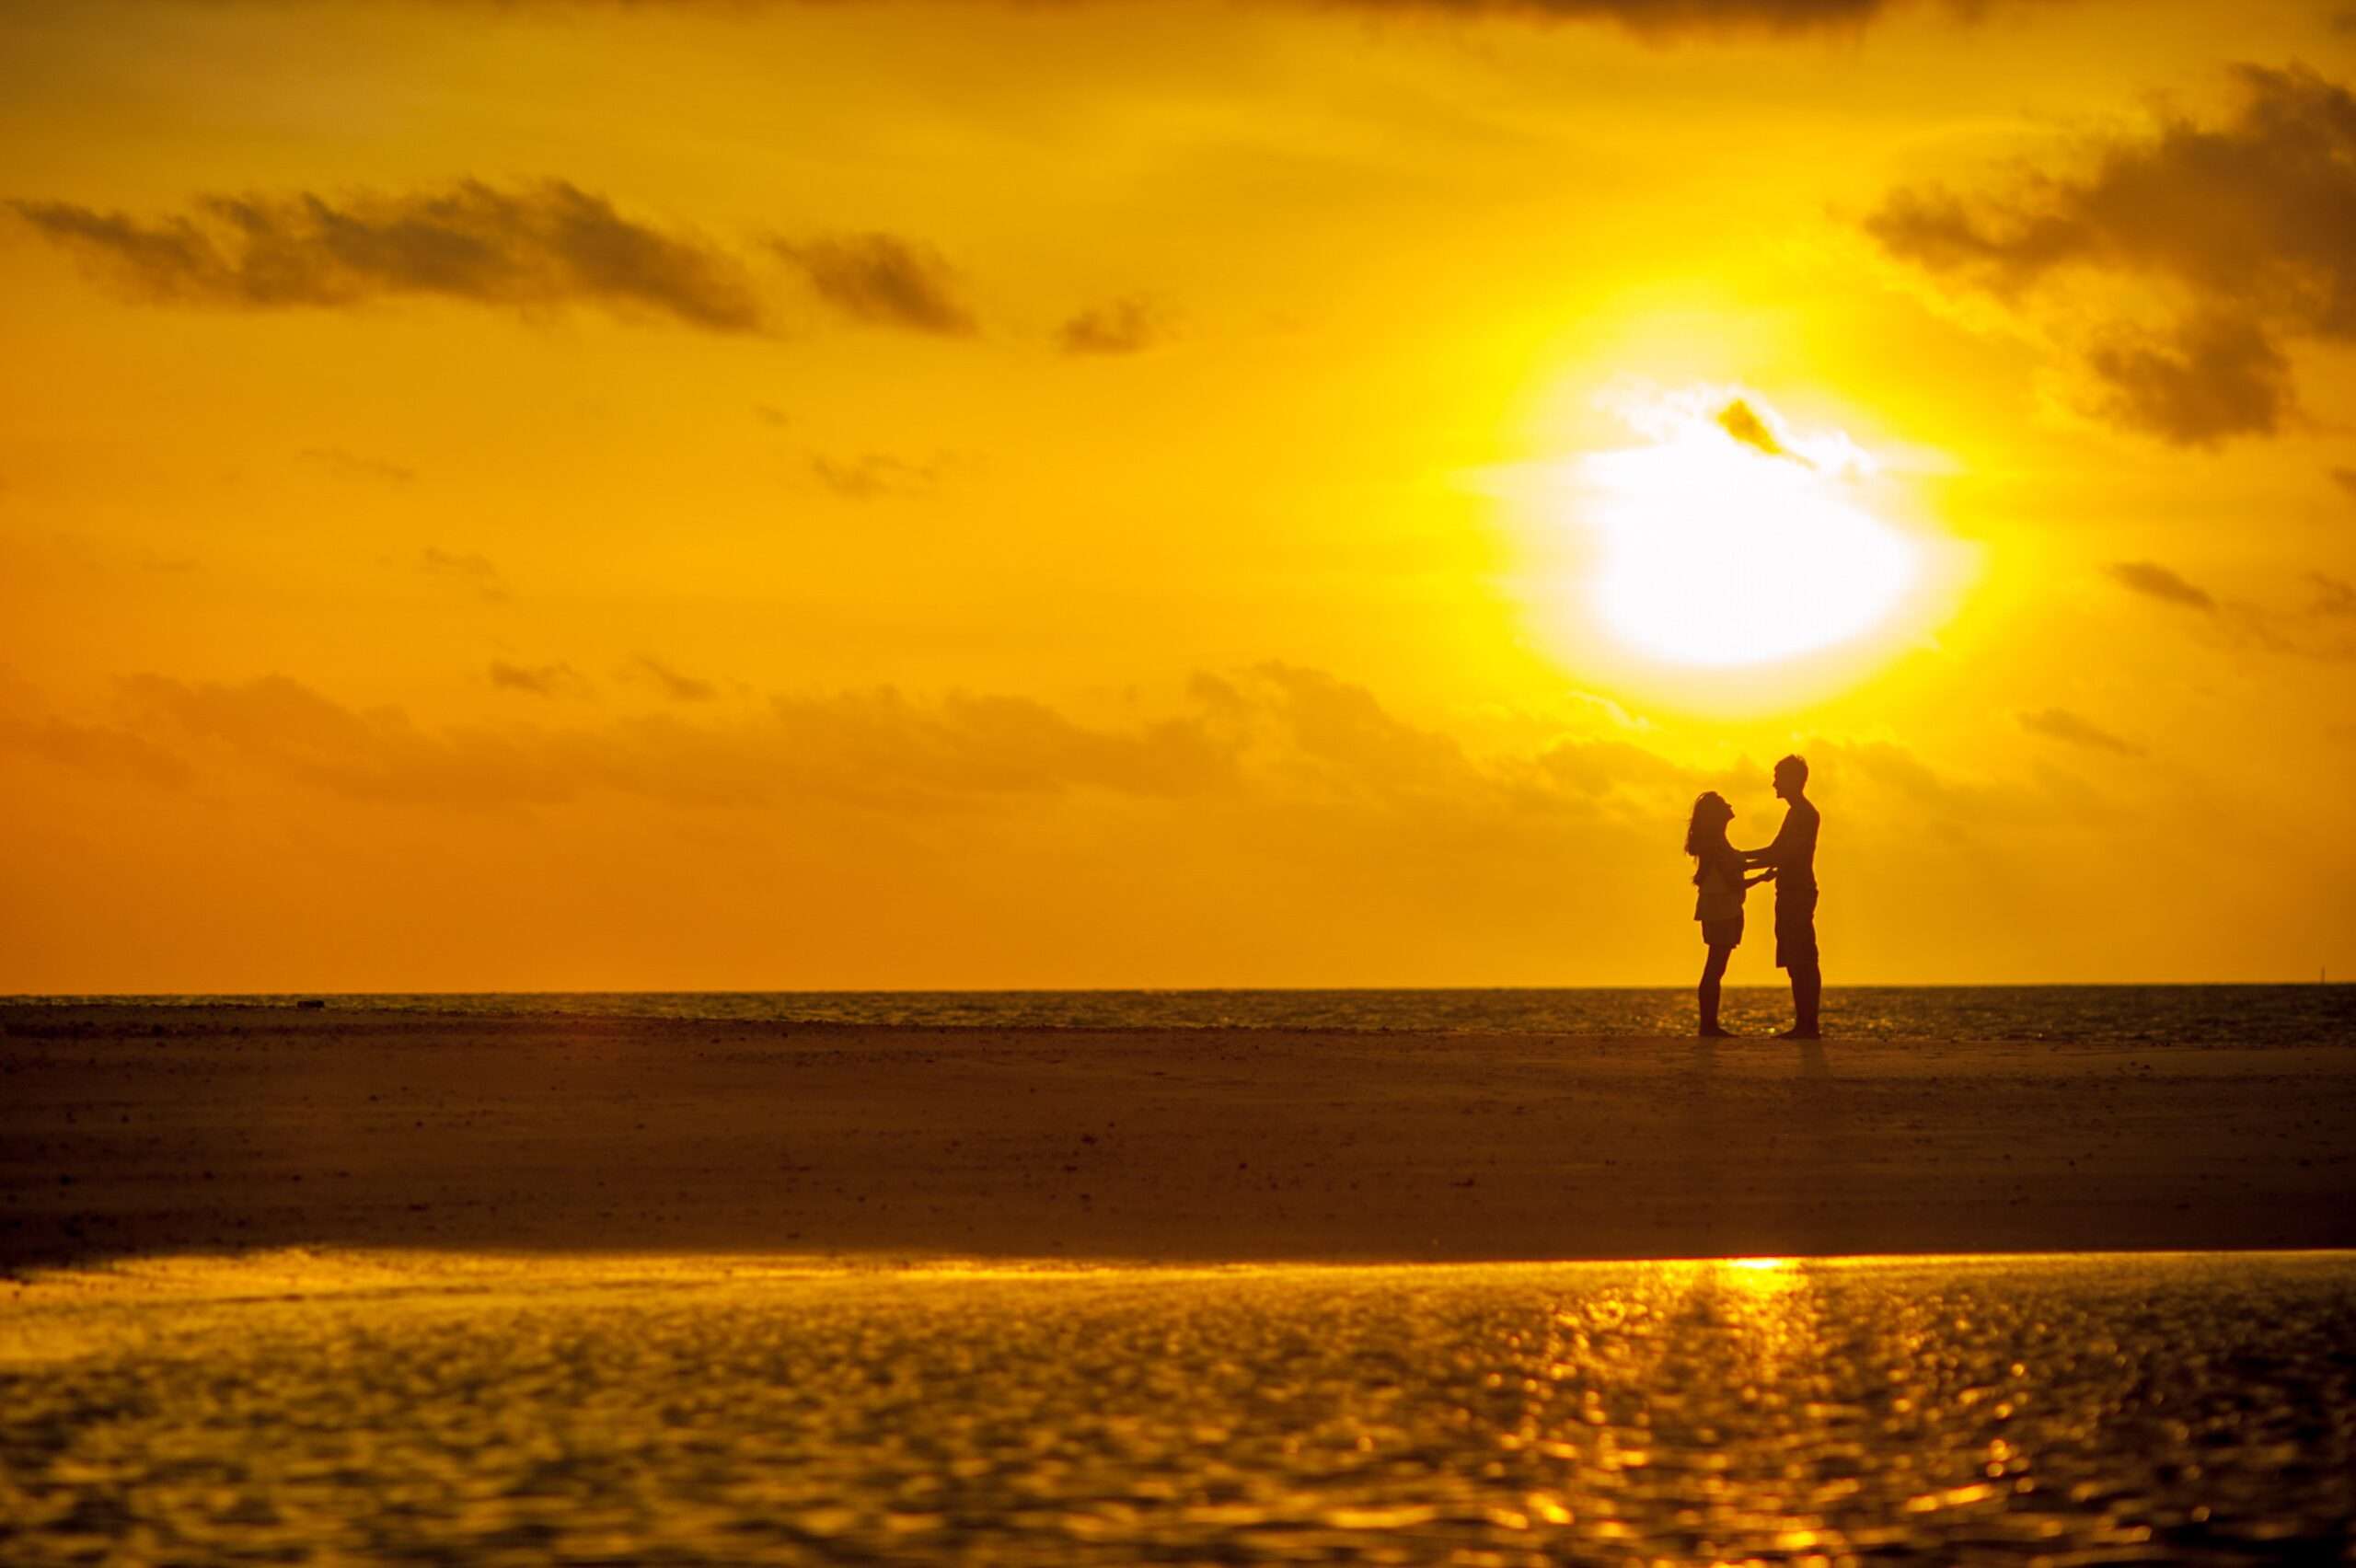 Man and woman embracing in front of a beautiful sunset over the ocean